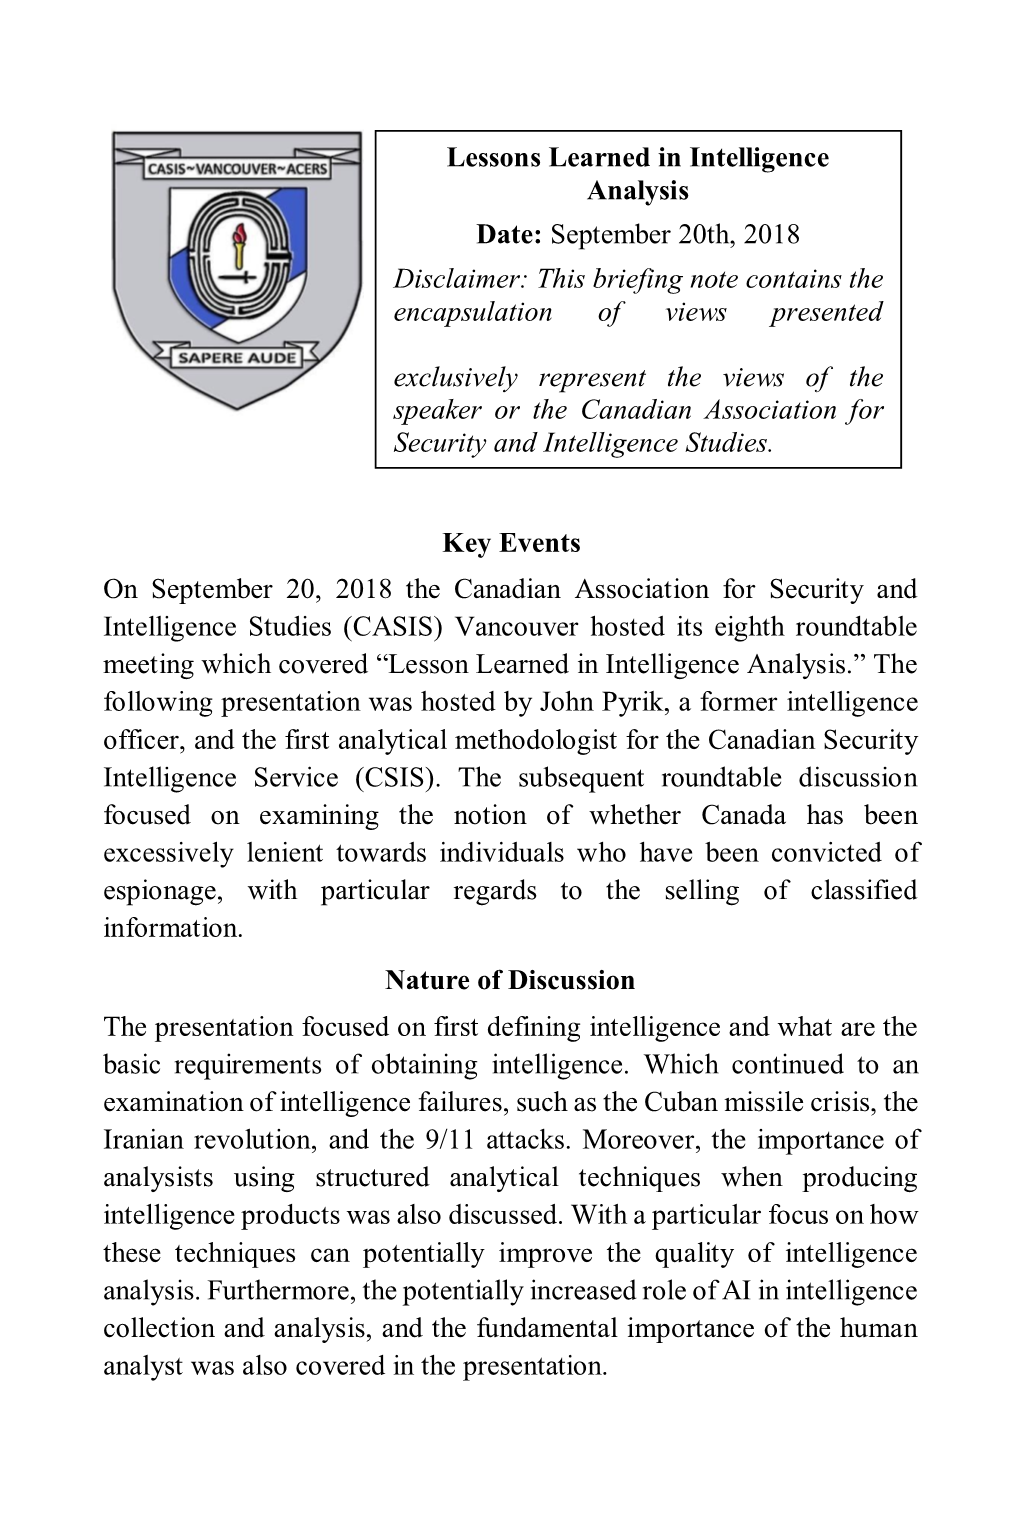 Key Events on September 20, 2018 the Canadian Association for Security and Intelligence Studies (CASIS) Vancouver Hosted Its